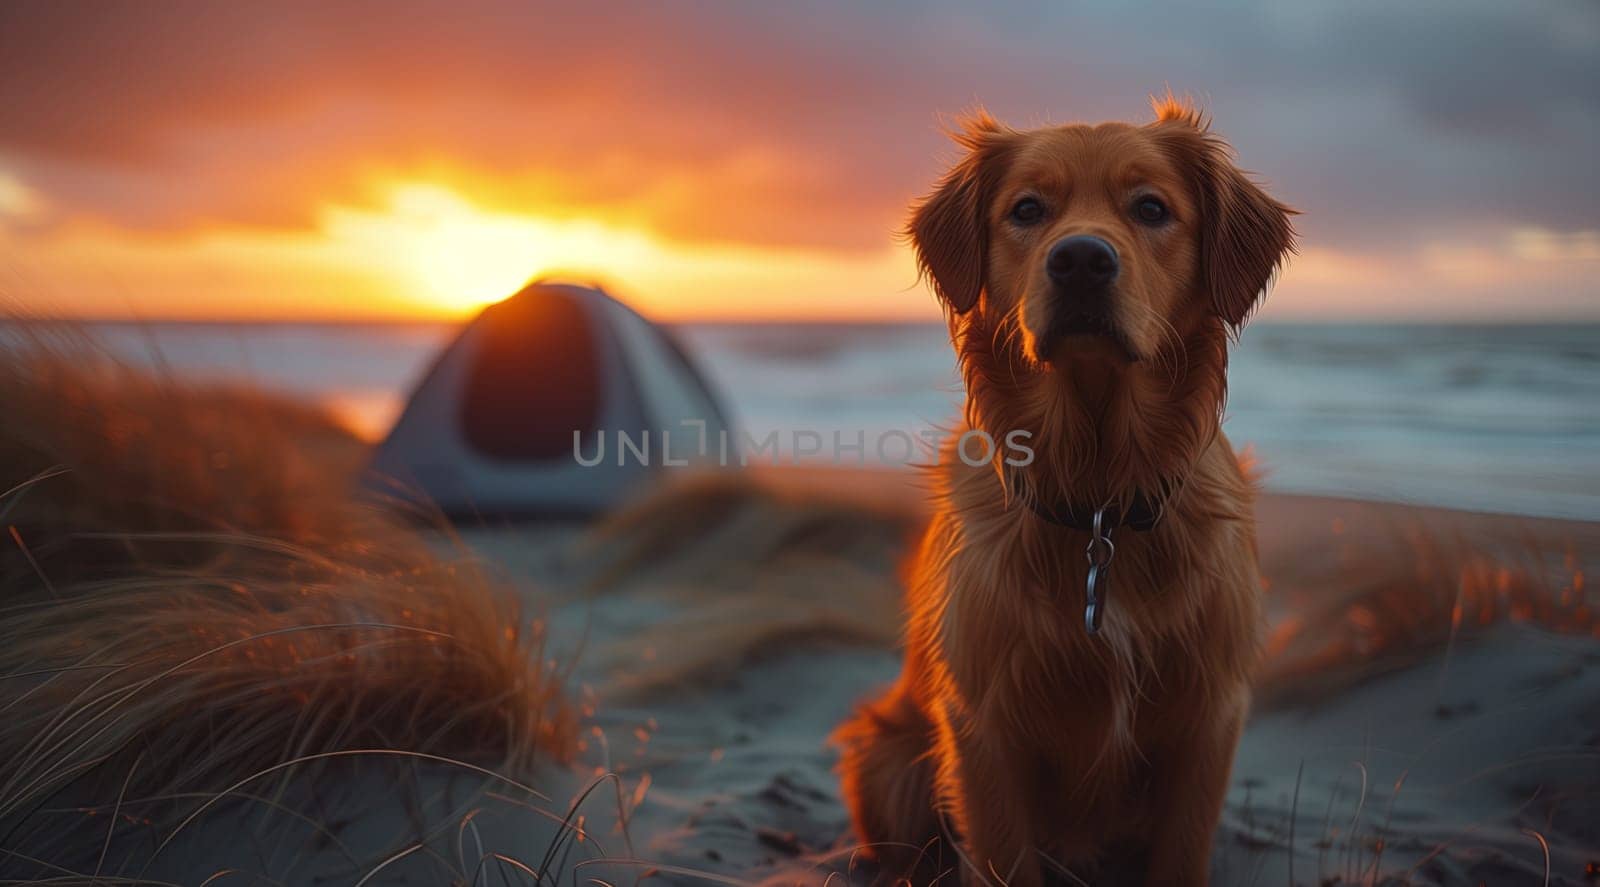 a dog is sitting on the beach at sunset with a tent in the background by richwolf